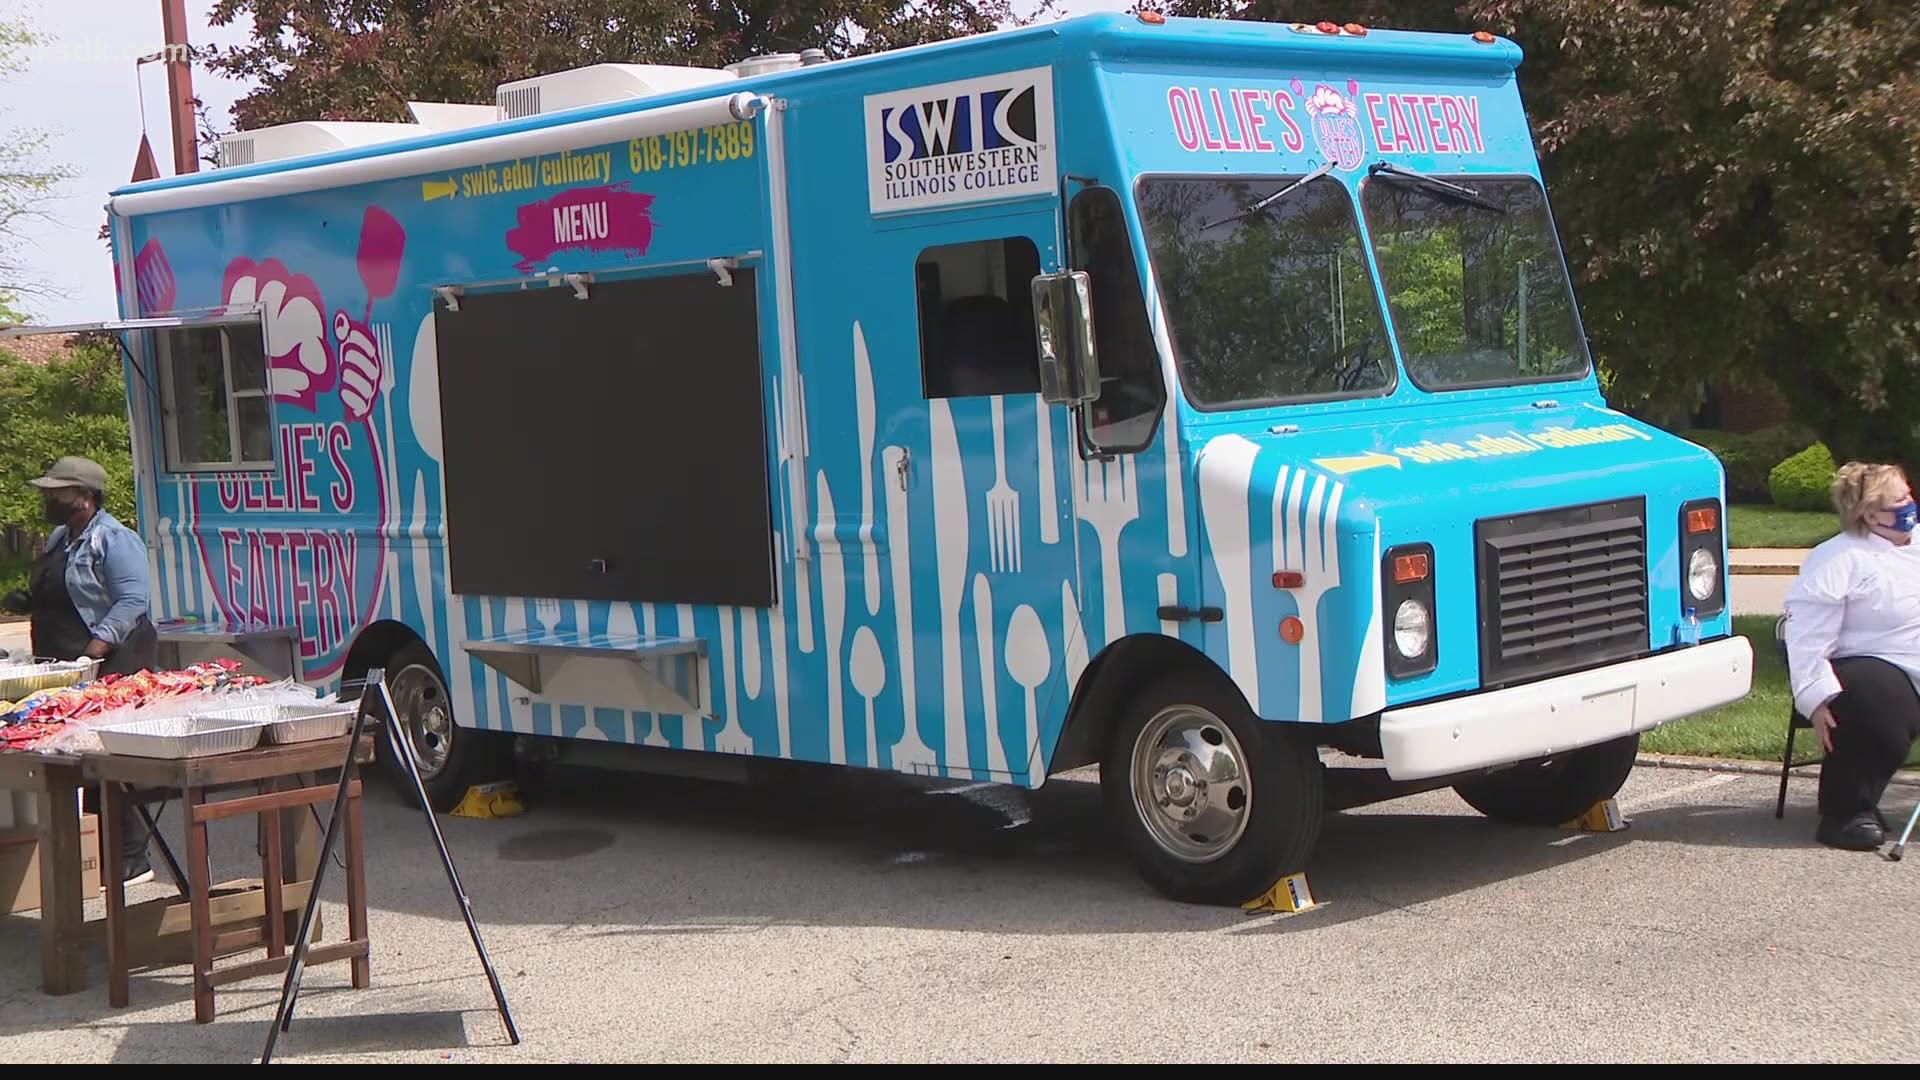 Learn how to manage and operate a food truck with the SWIC Food Truck Management certificate program.